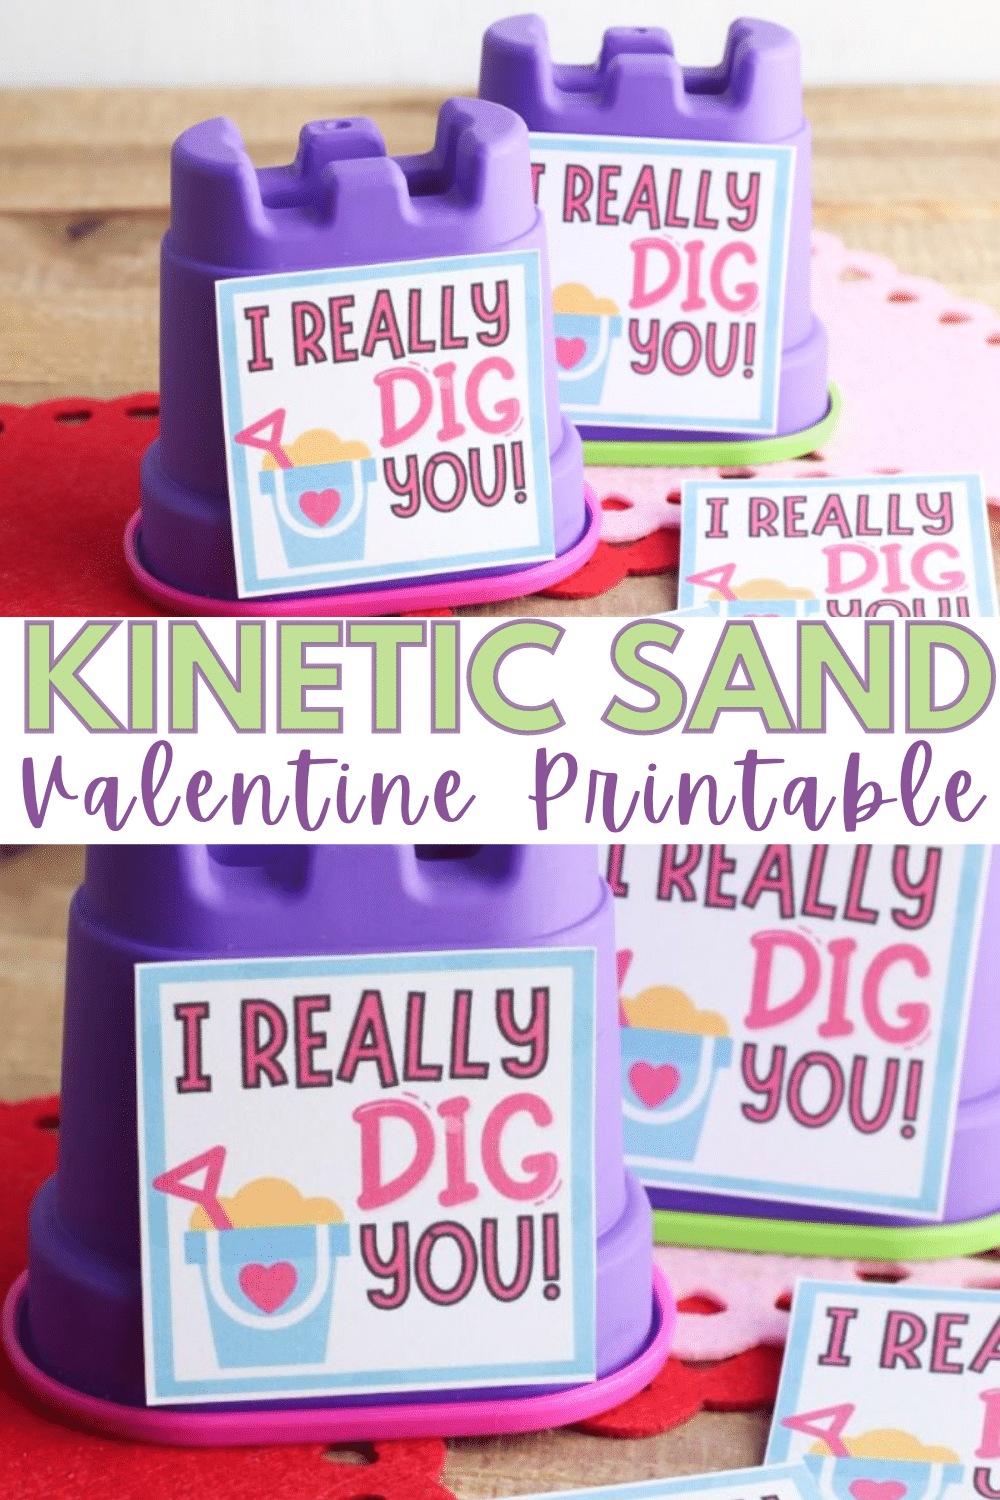 The kids are going to love this Kinetic Sand Valentine printable! This fun Valentine's Day printable makes a fun and unique gift! #valentinesday #valentine #kineticsand #freeprintable #forkids via @wondermomwannab